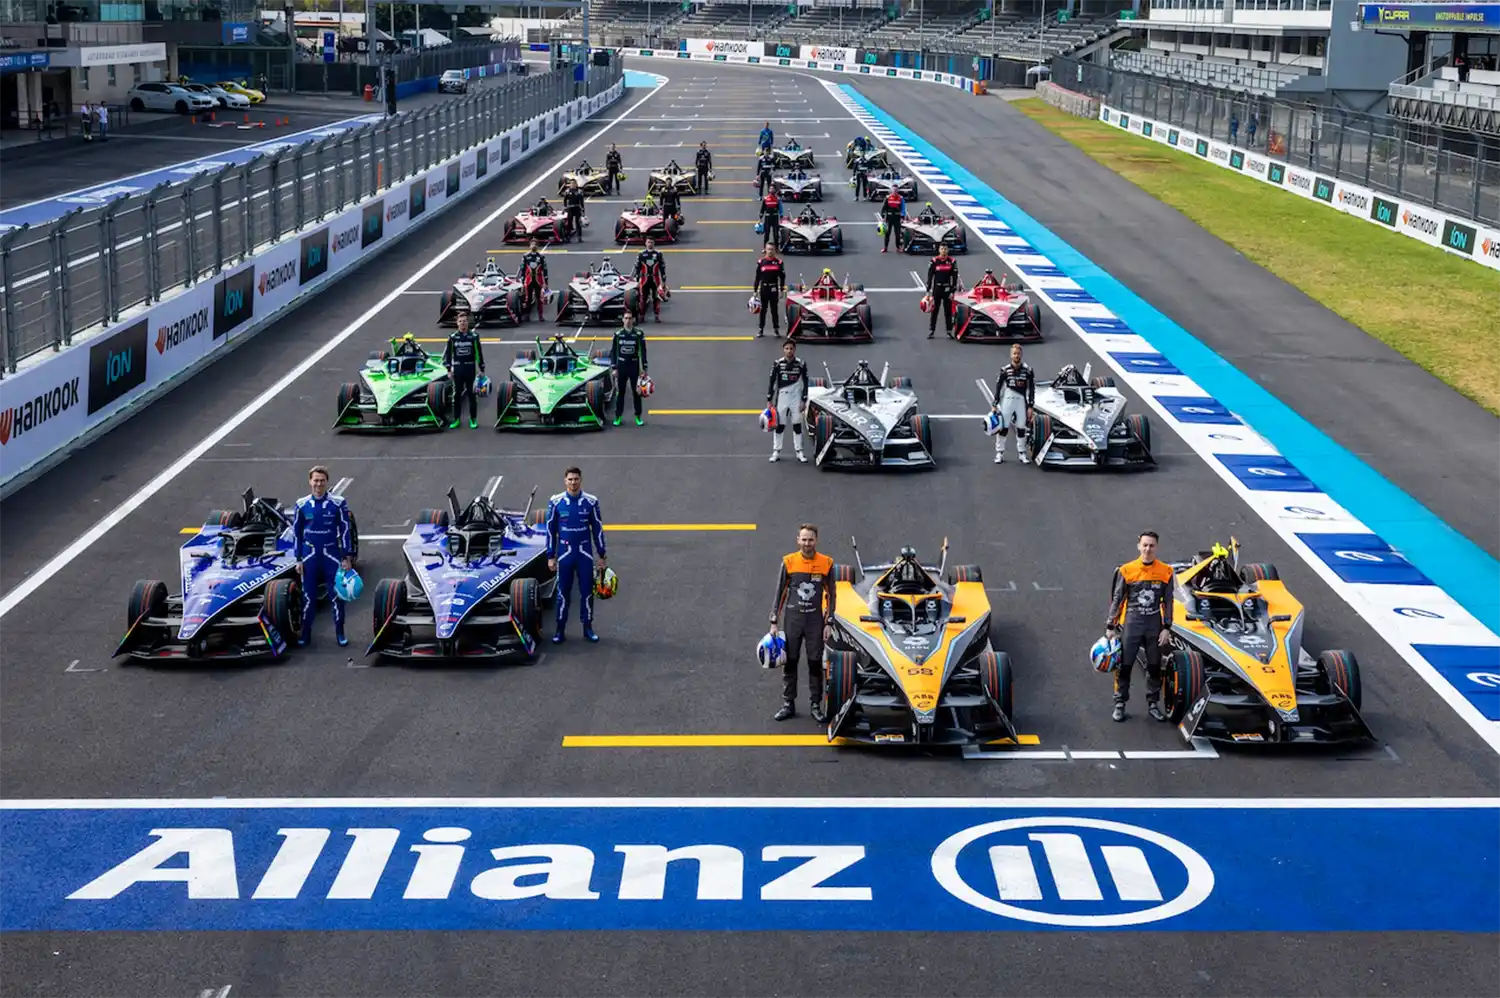 USA And Germany Battle For Lead In Formula E World Championship Wheelz-English